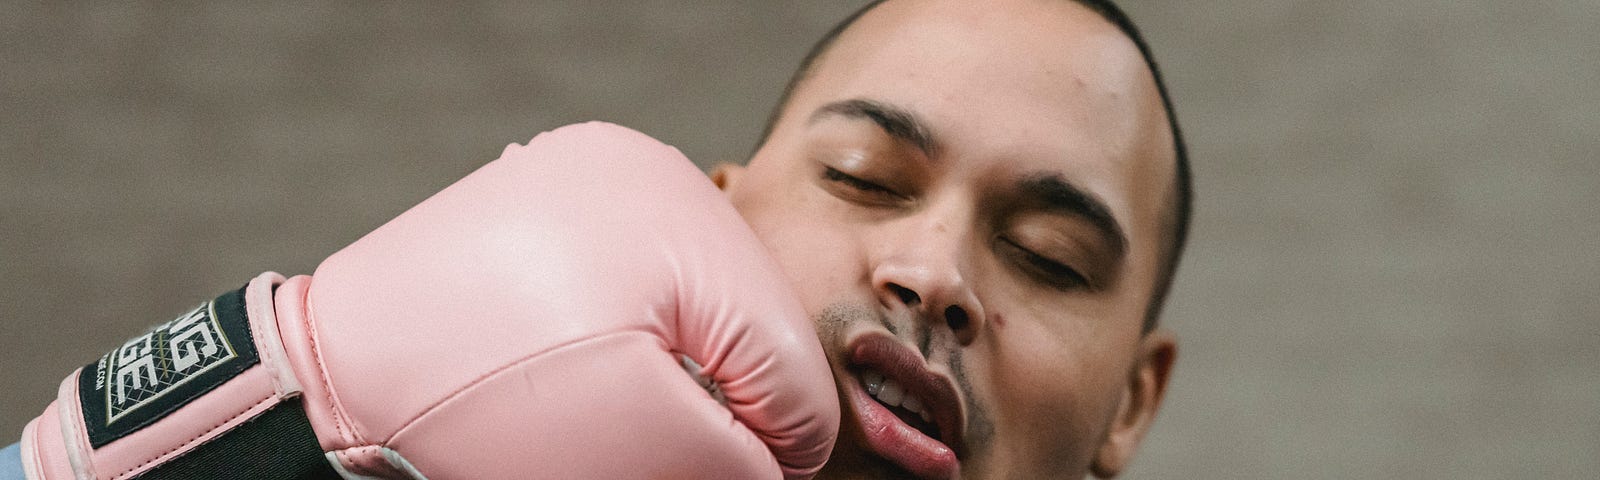 A man being punched in the face by a pink boxing glove